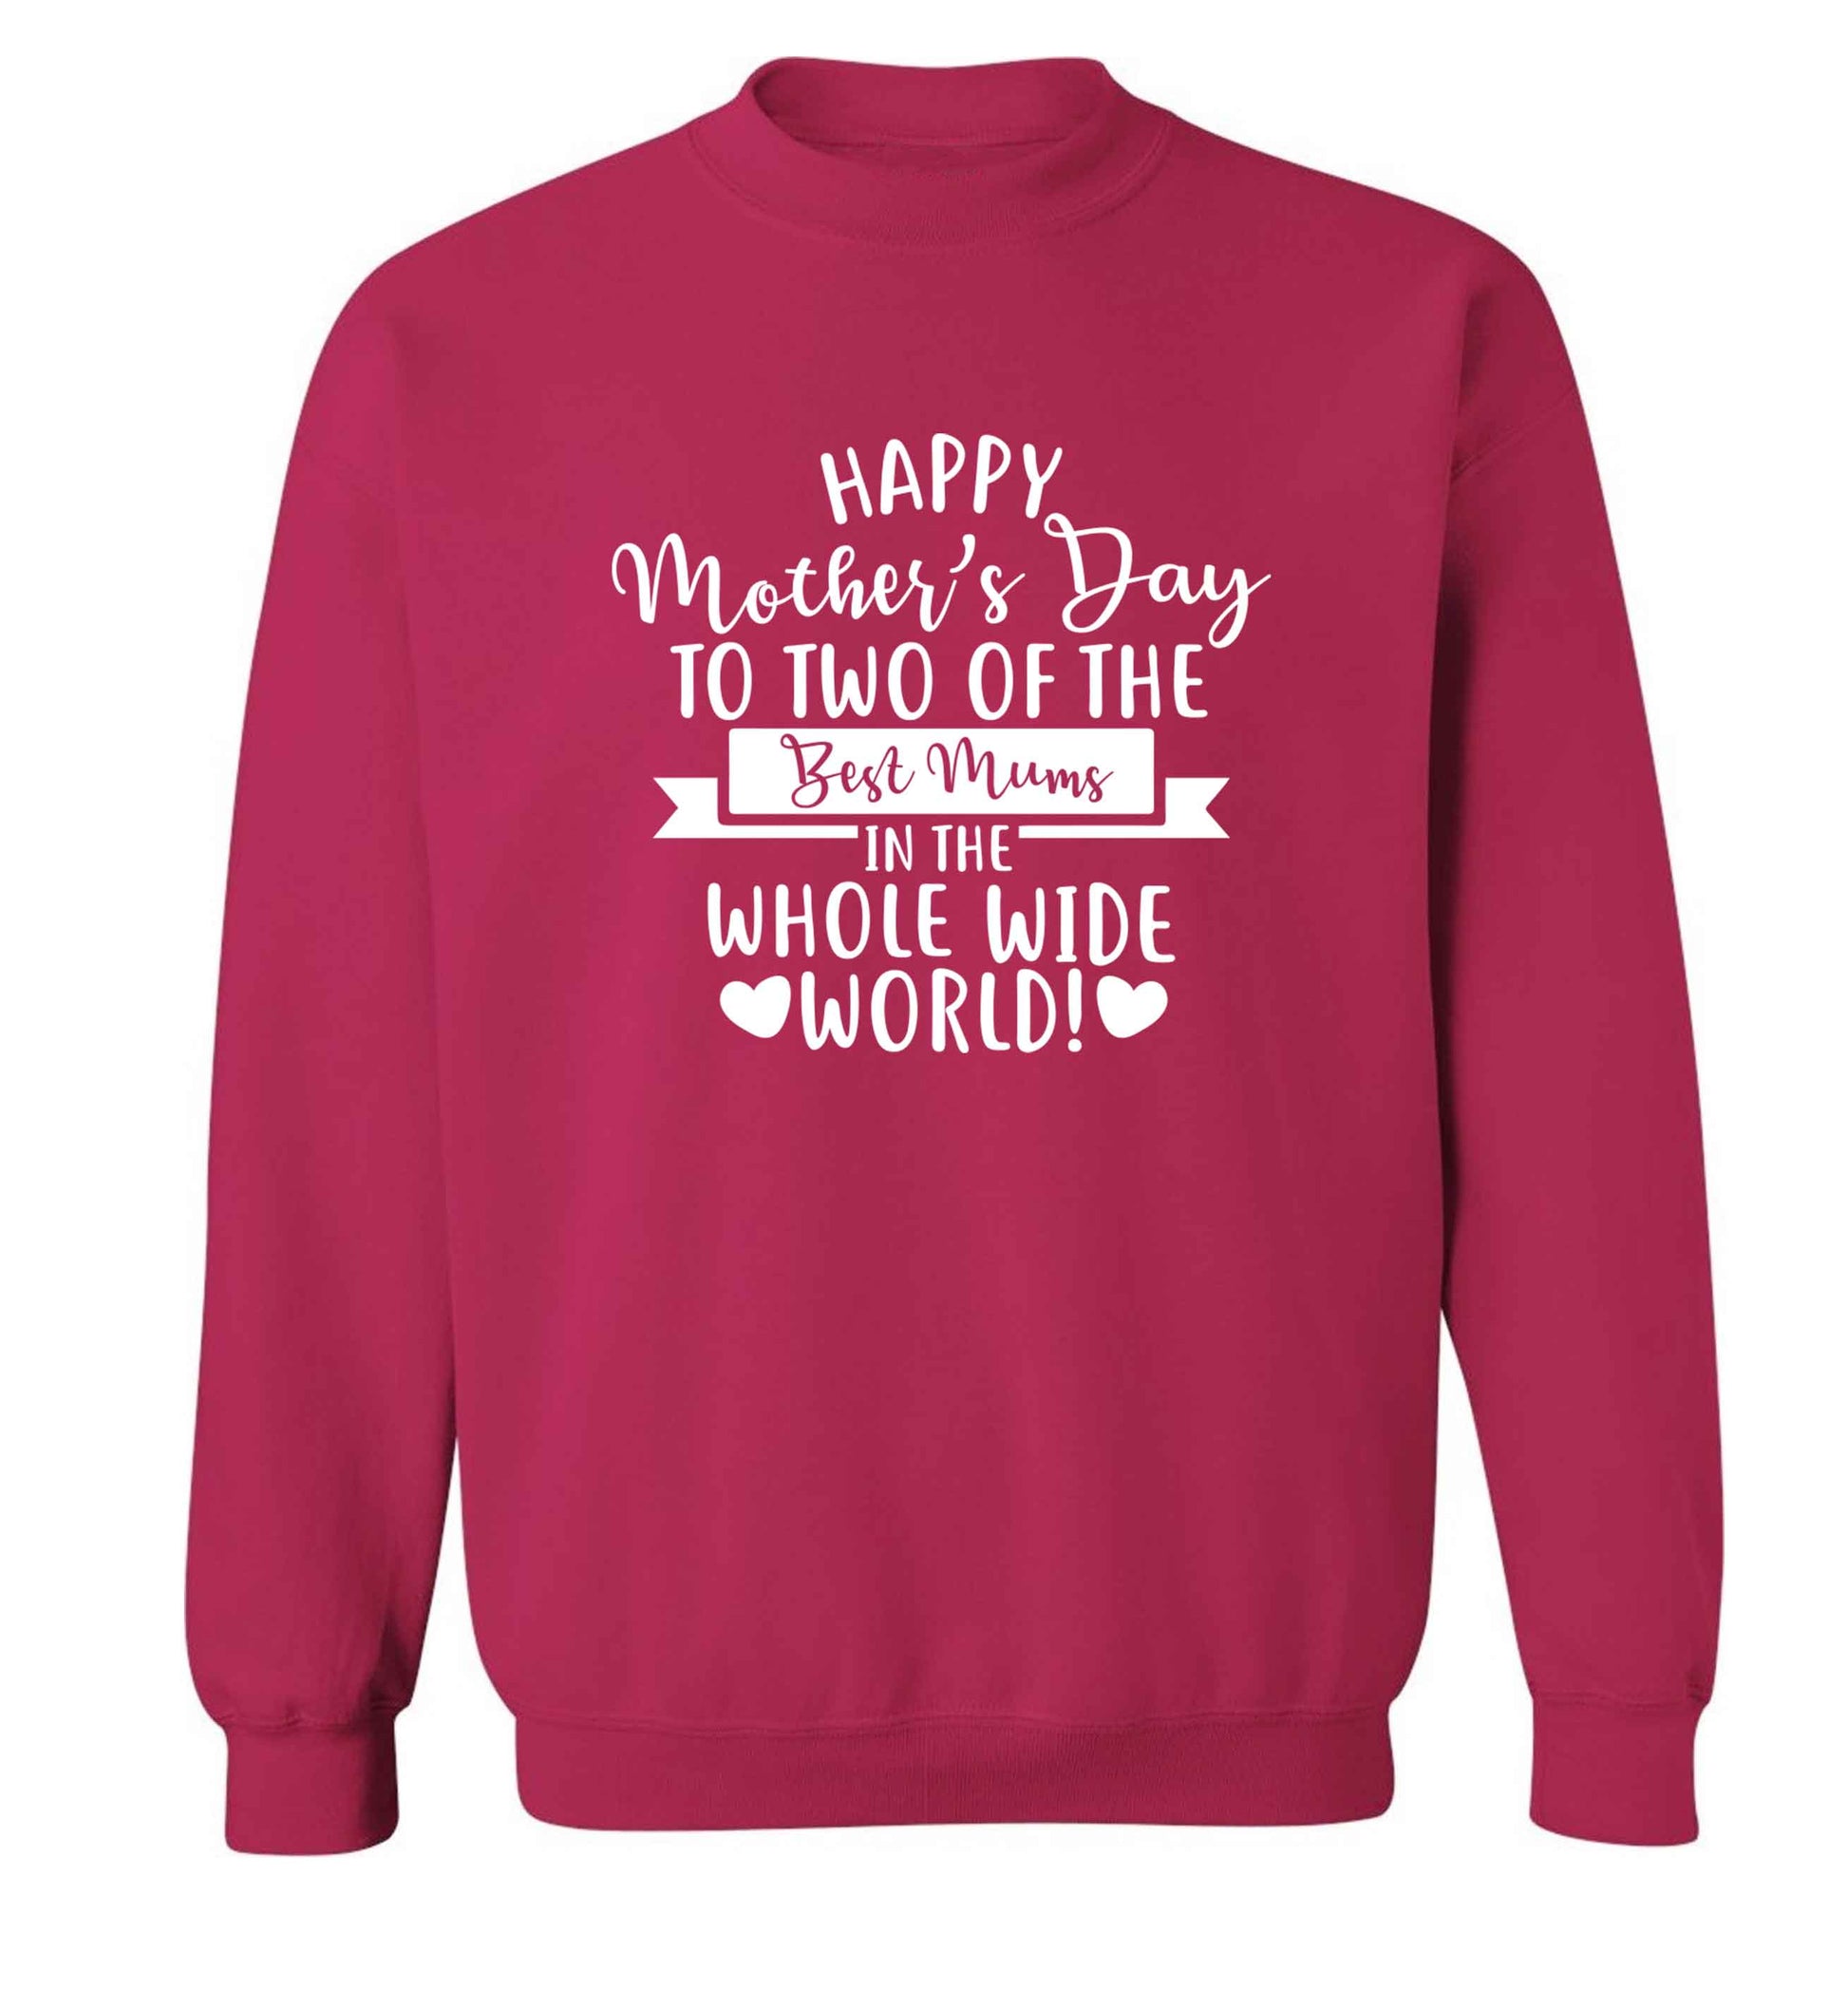 Happy mother's day to two of the best mums in the whole wide world adult's unisex pink sweater 2XL